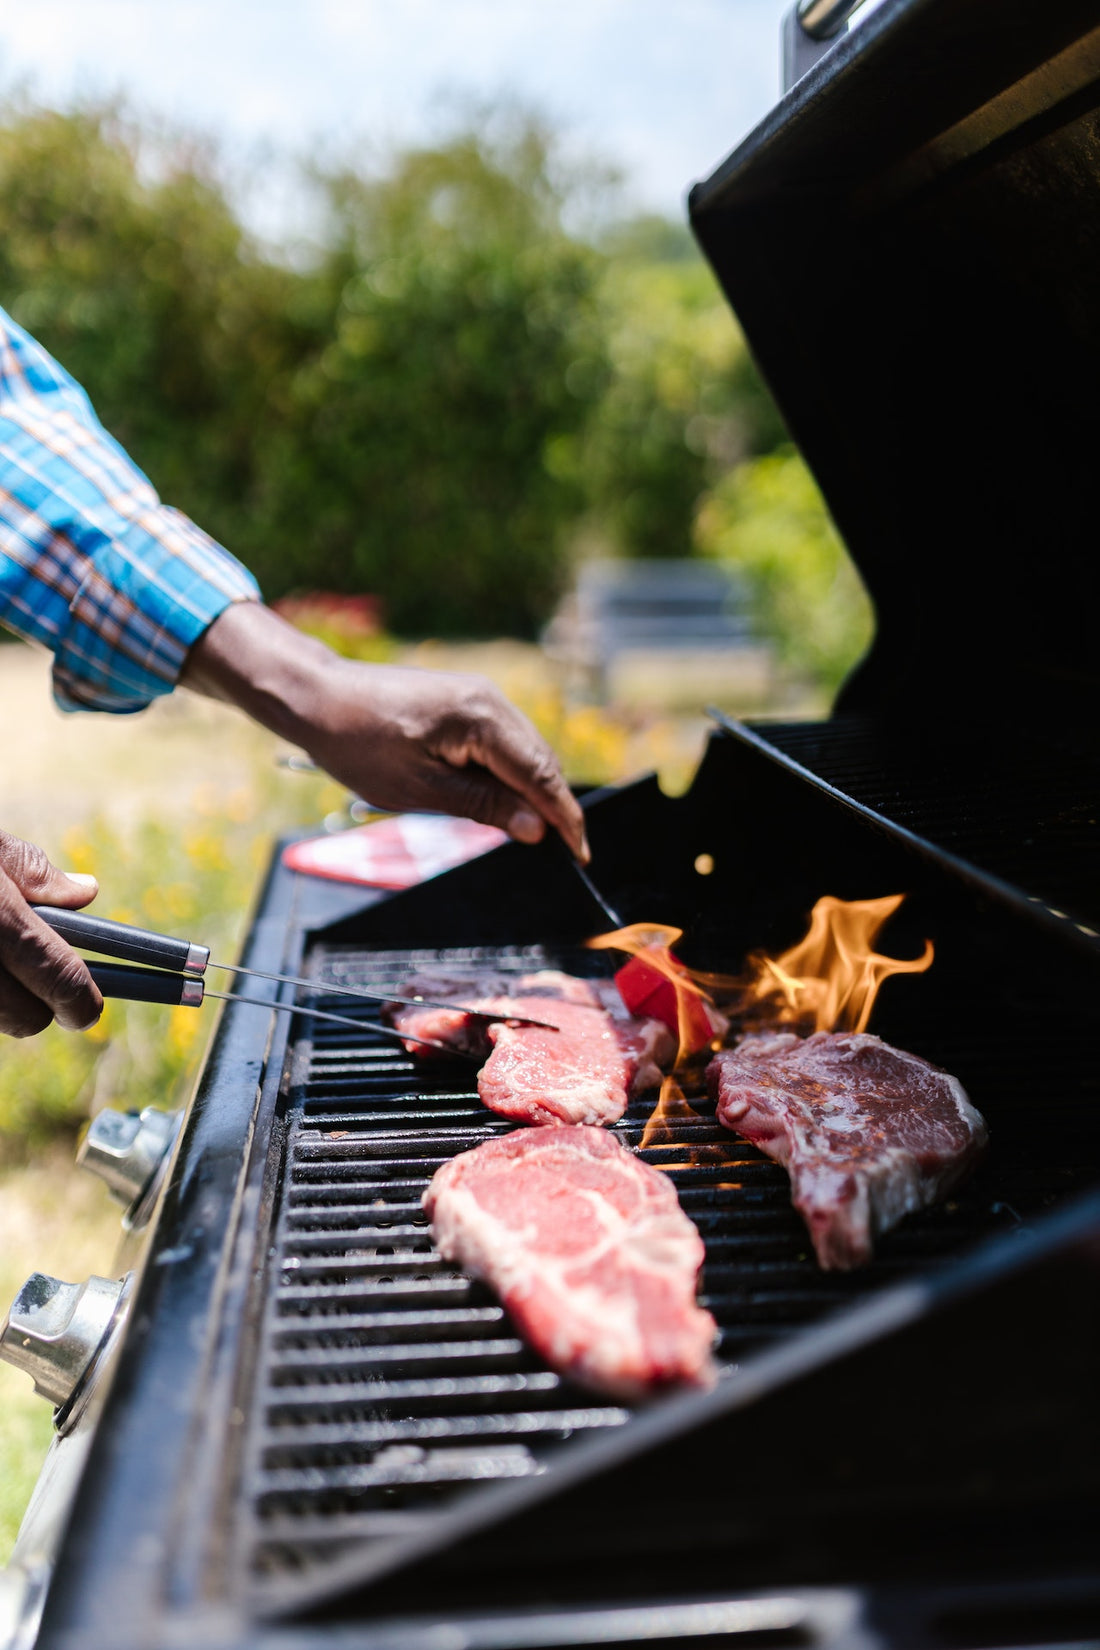 Mastering Indirect Heat and Smoking on a Propane Grill: A Griller's Guide